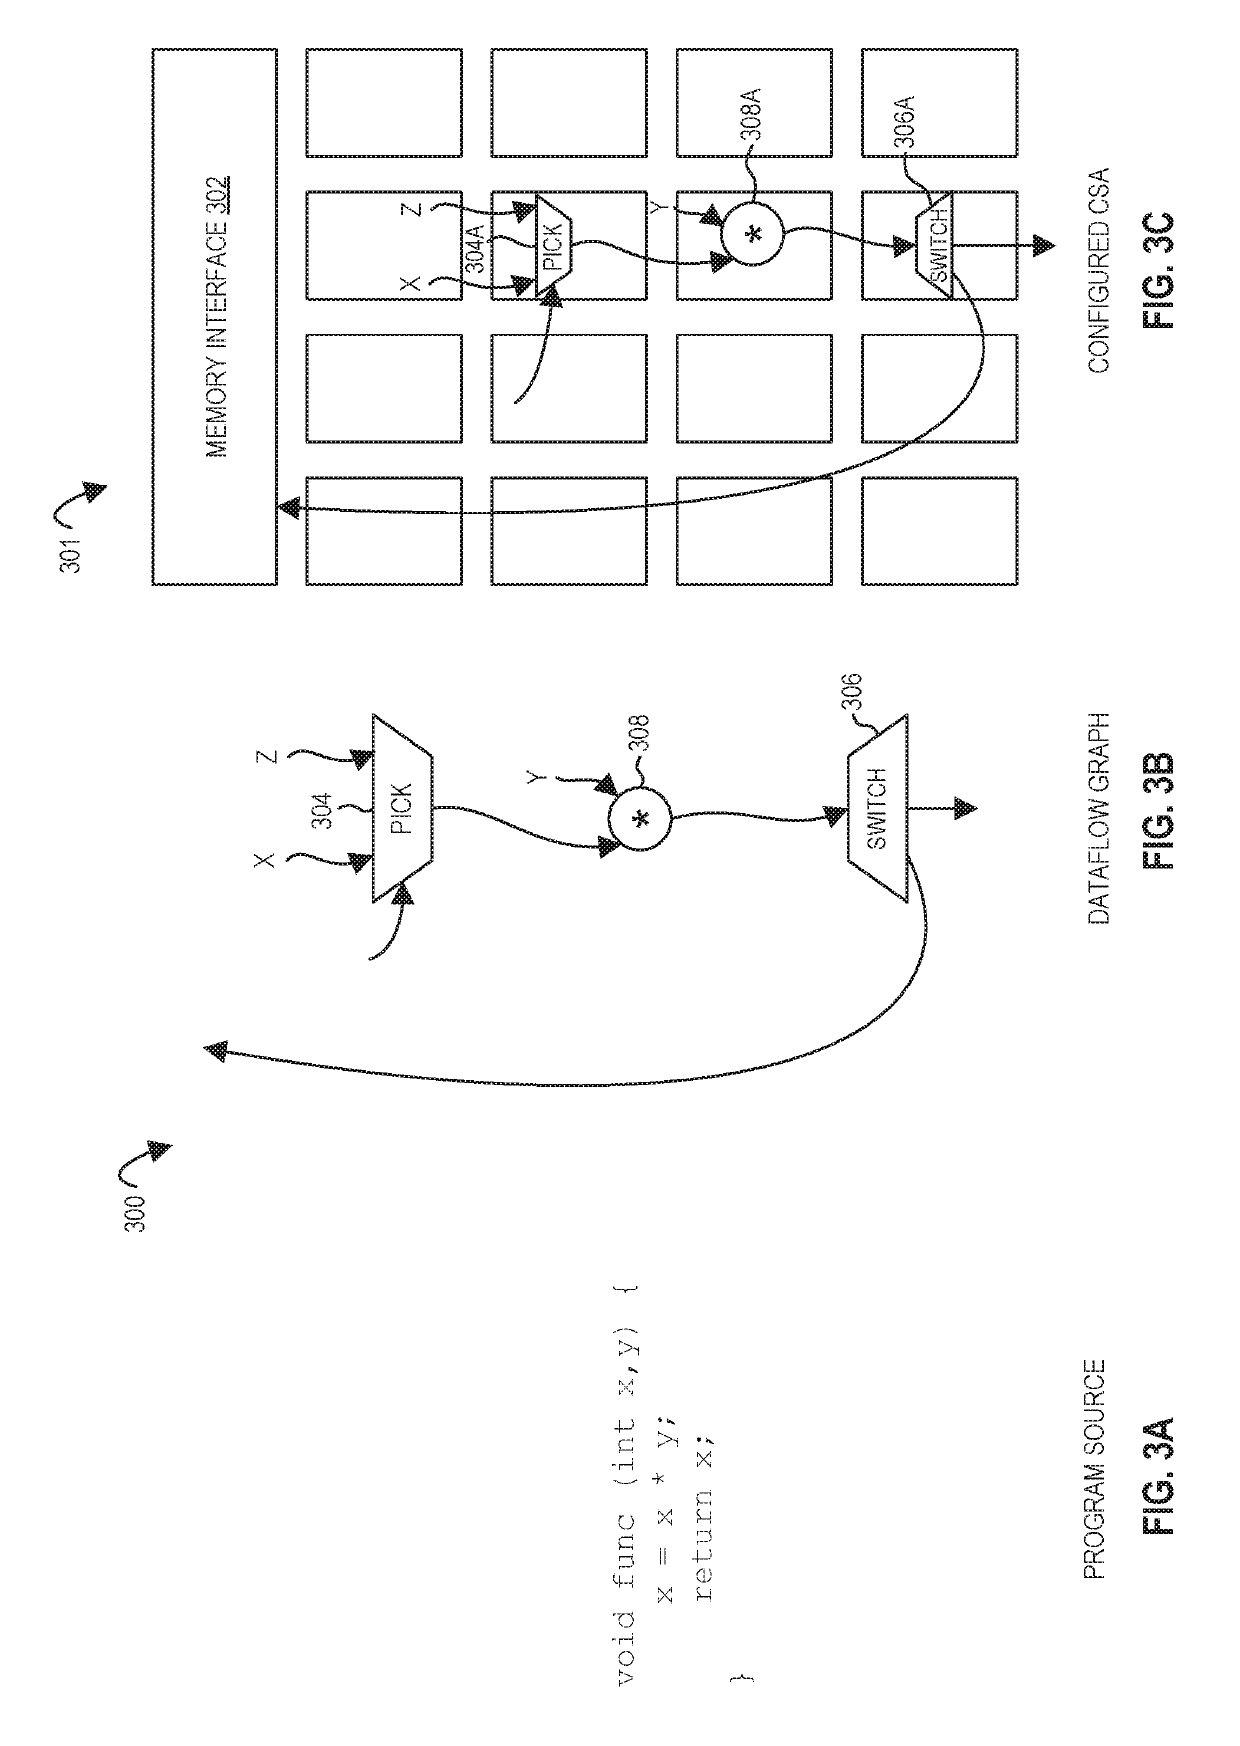 Processors, methods, and systems for debugging a configurable spatial accelerator